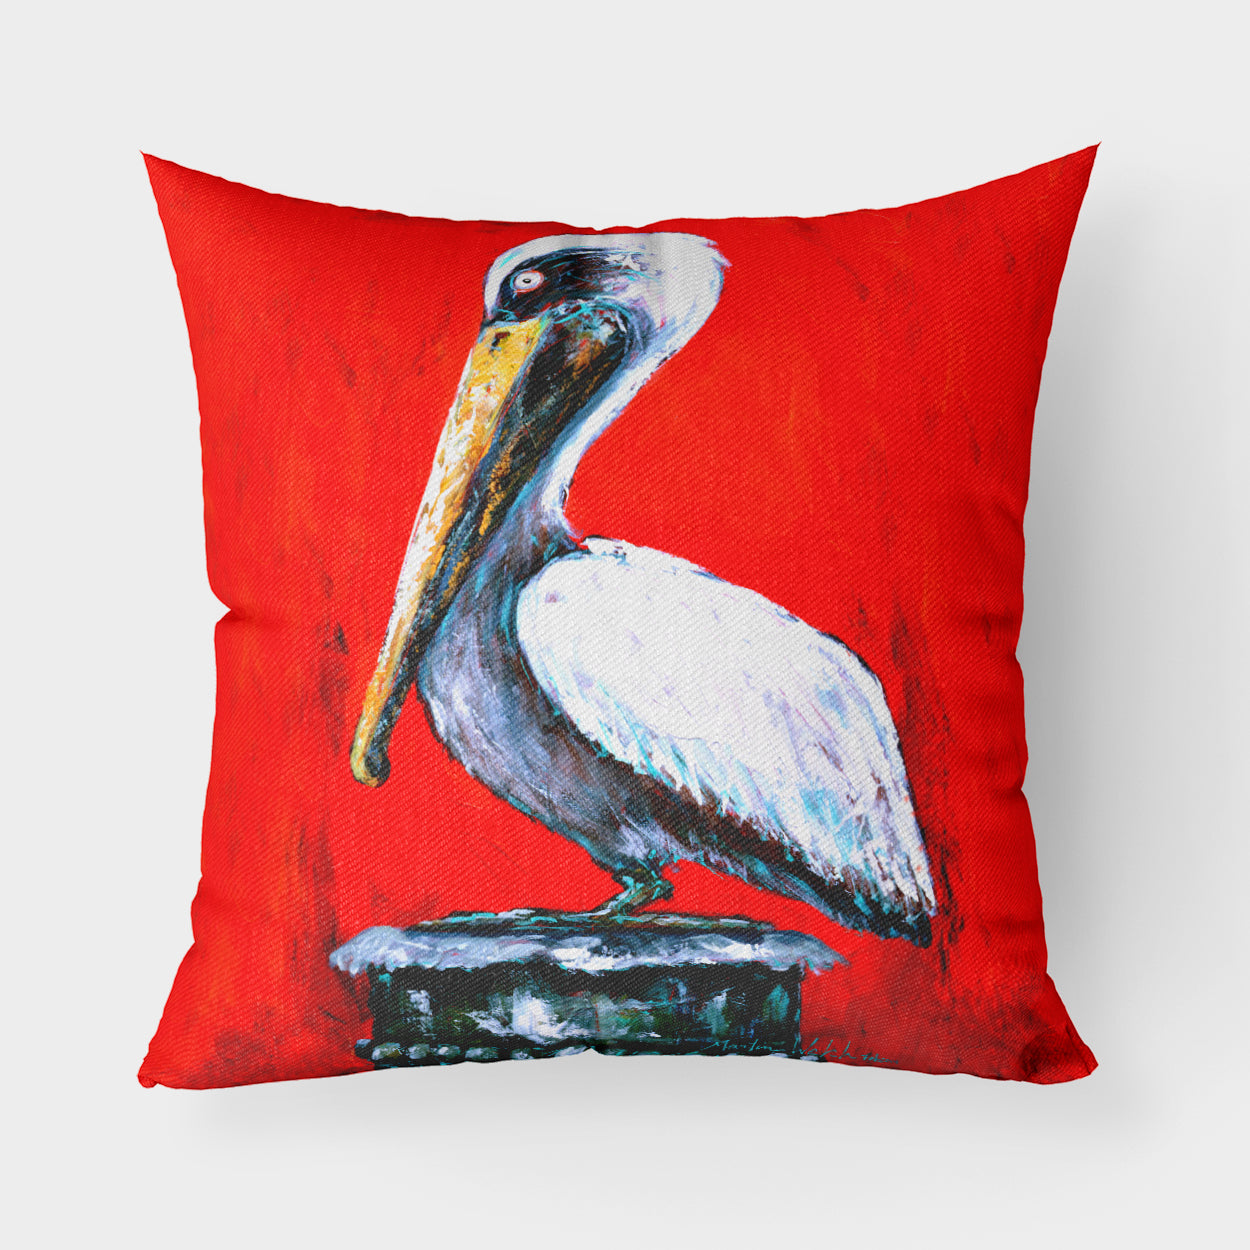 Buy this Bird - Pelican Red Dawn Fabric Decorative Pillow